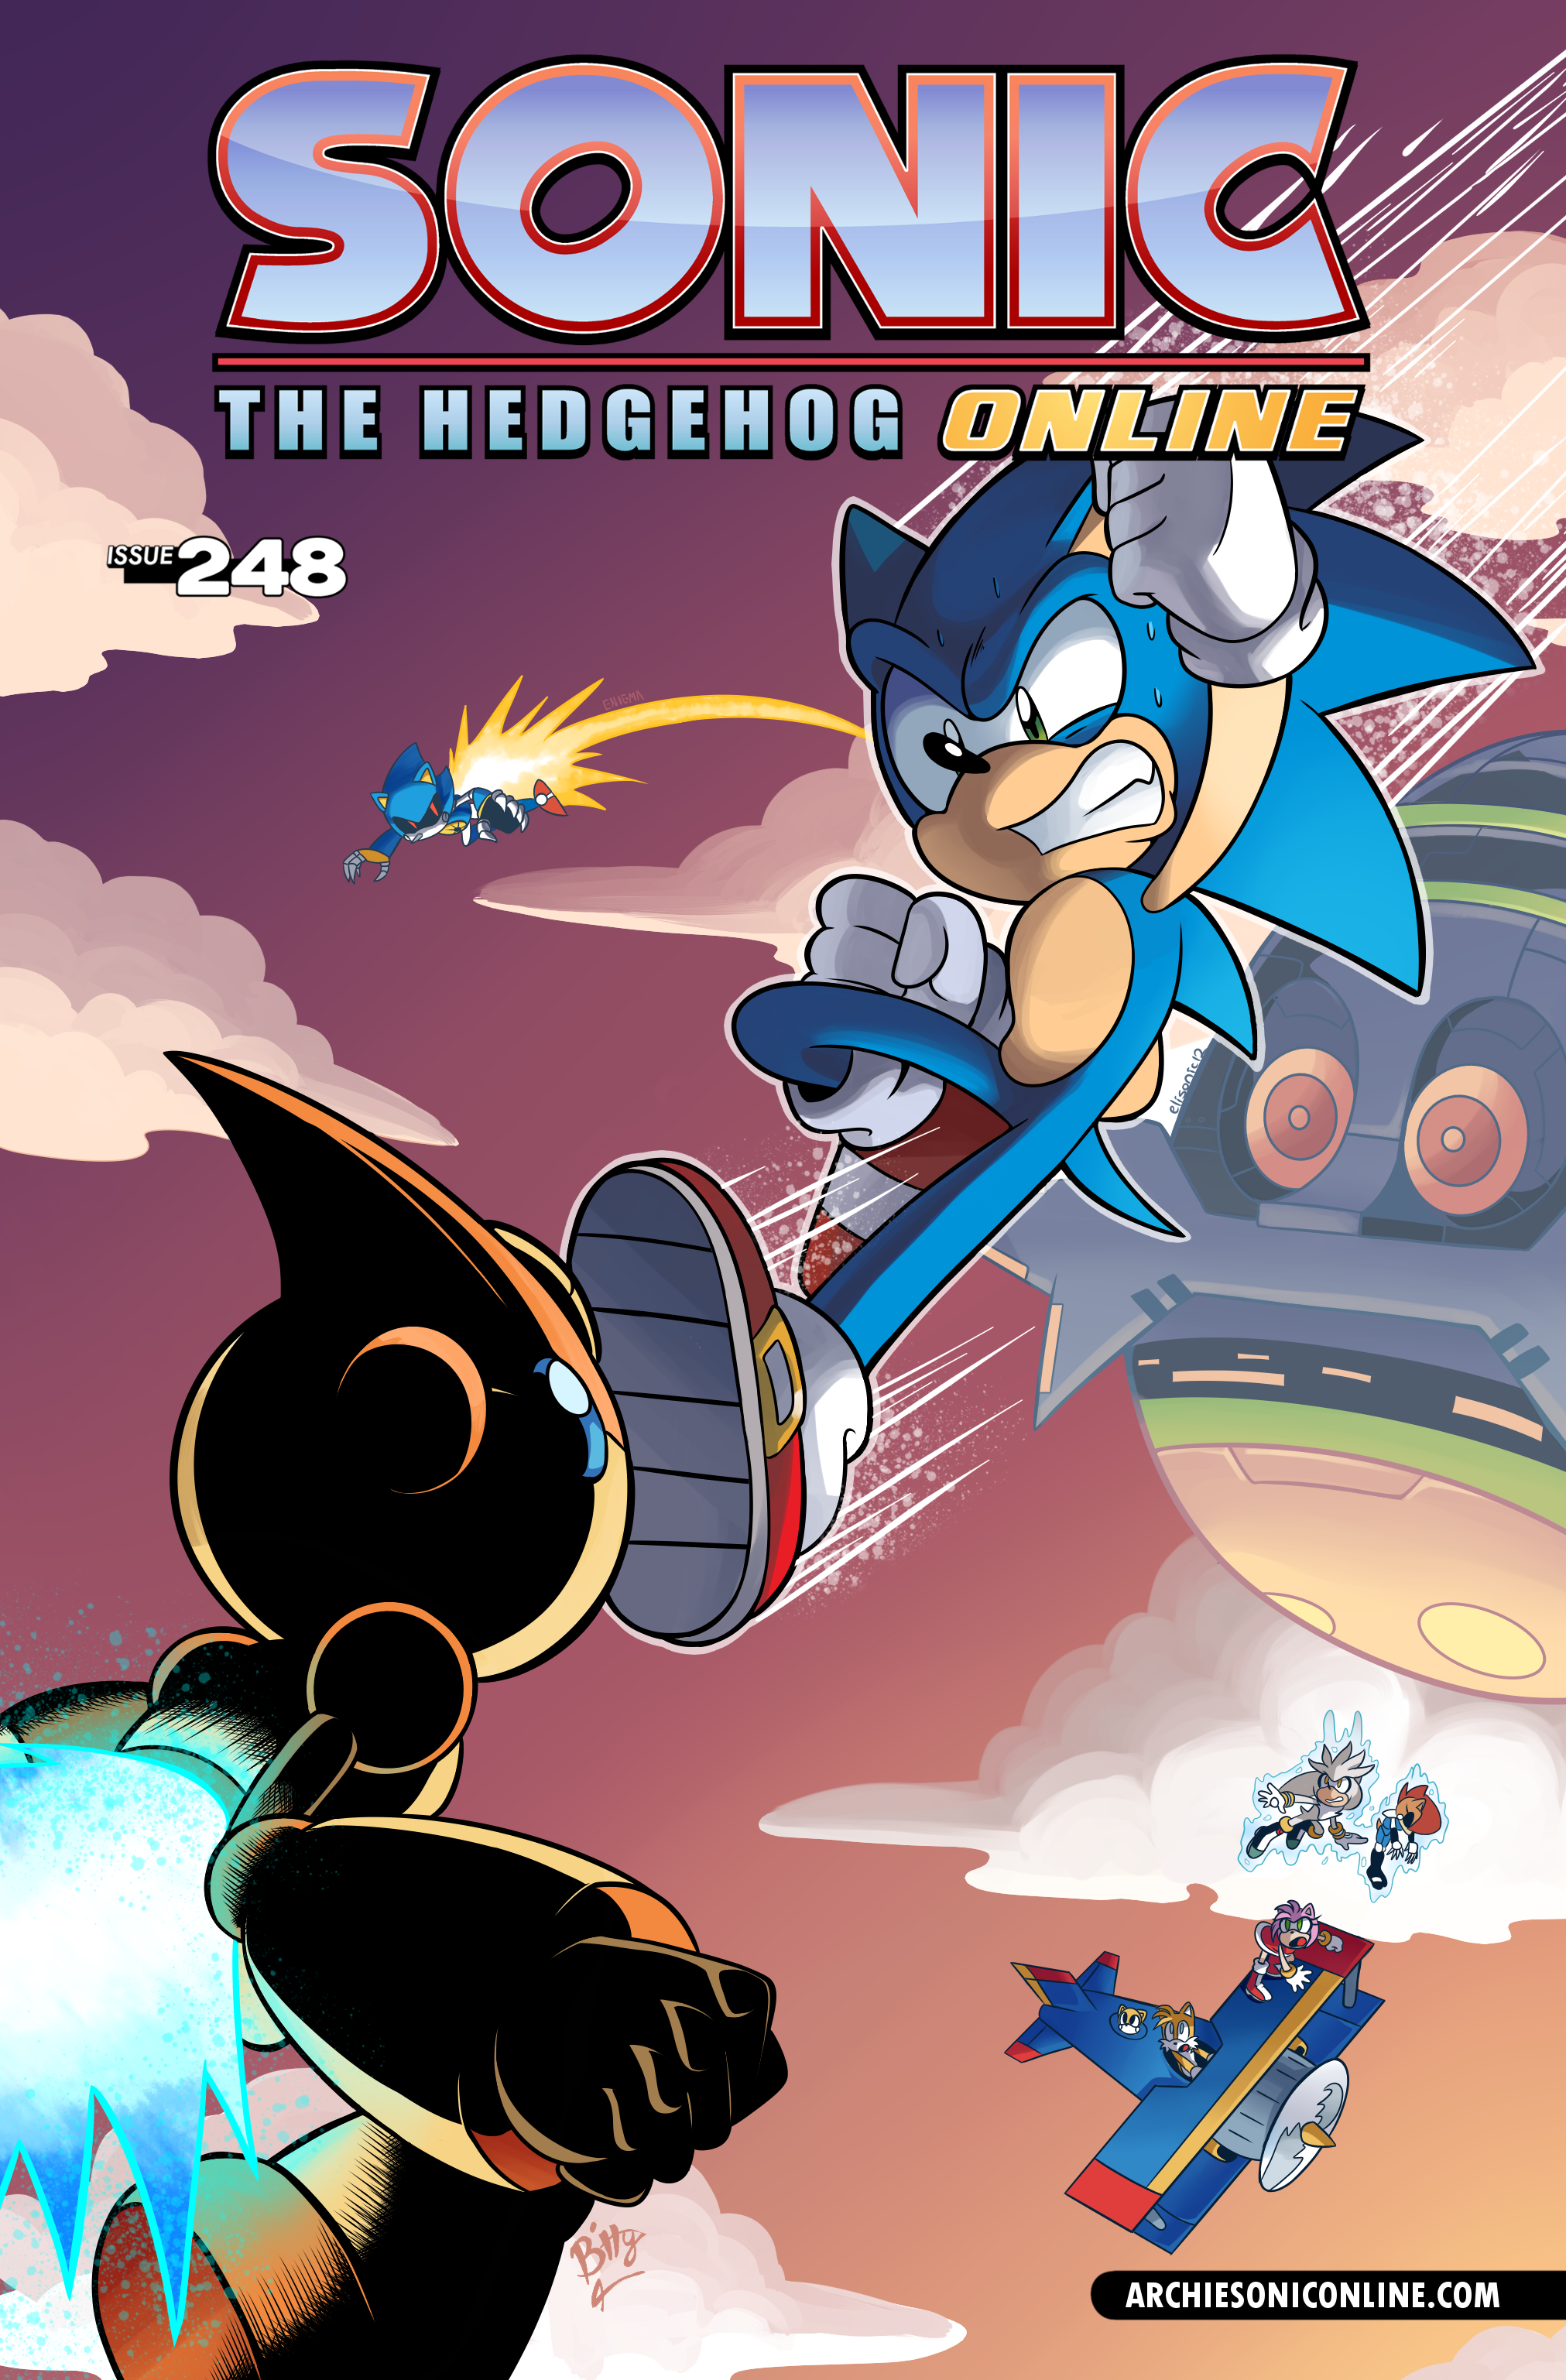 sonic_the_hedgehog_online_248_cover_fina